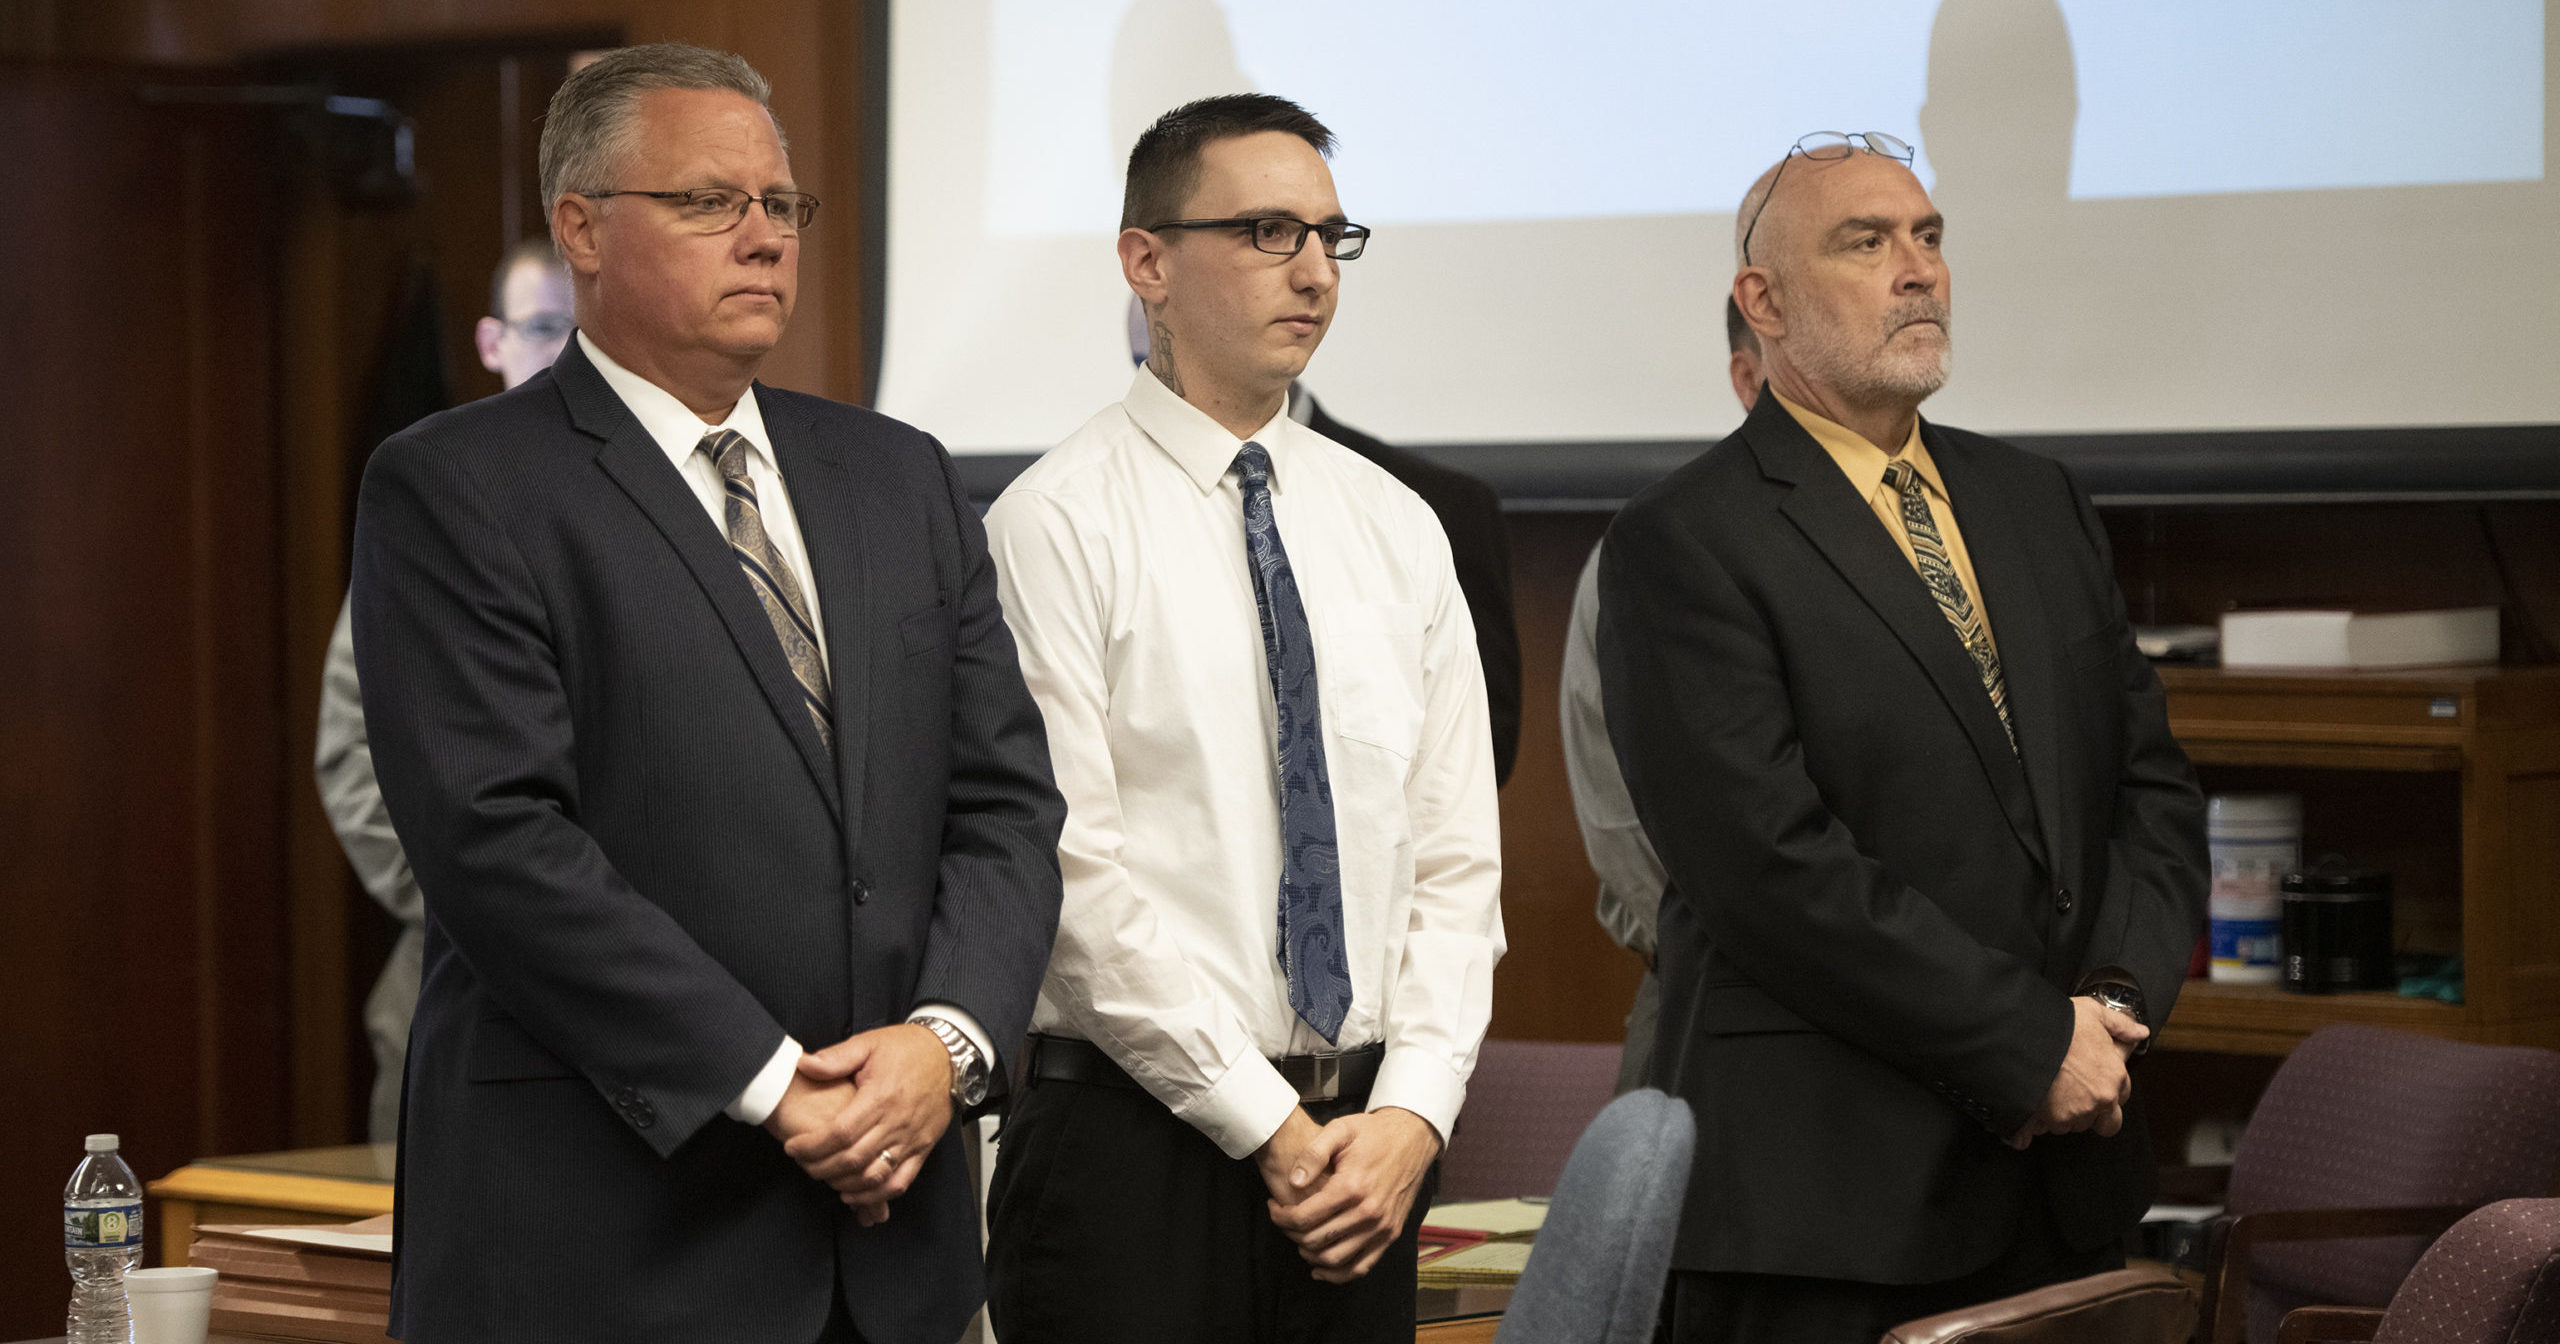 Paul Bellar, middle, appears before Jackson County Circuit Court Judge Thomas Wilson on Oct. 5 in Jackson, Michigan.